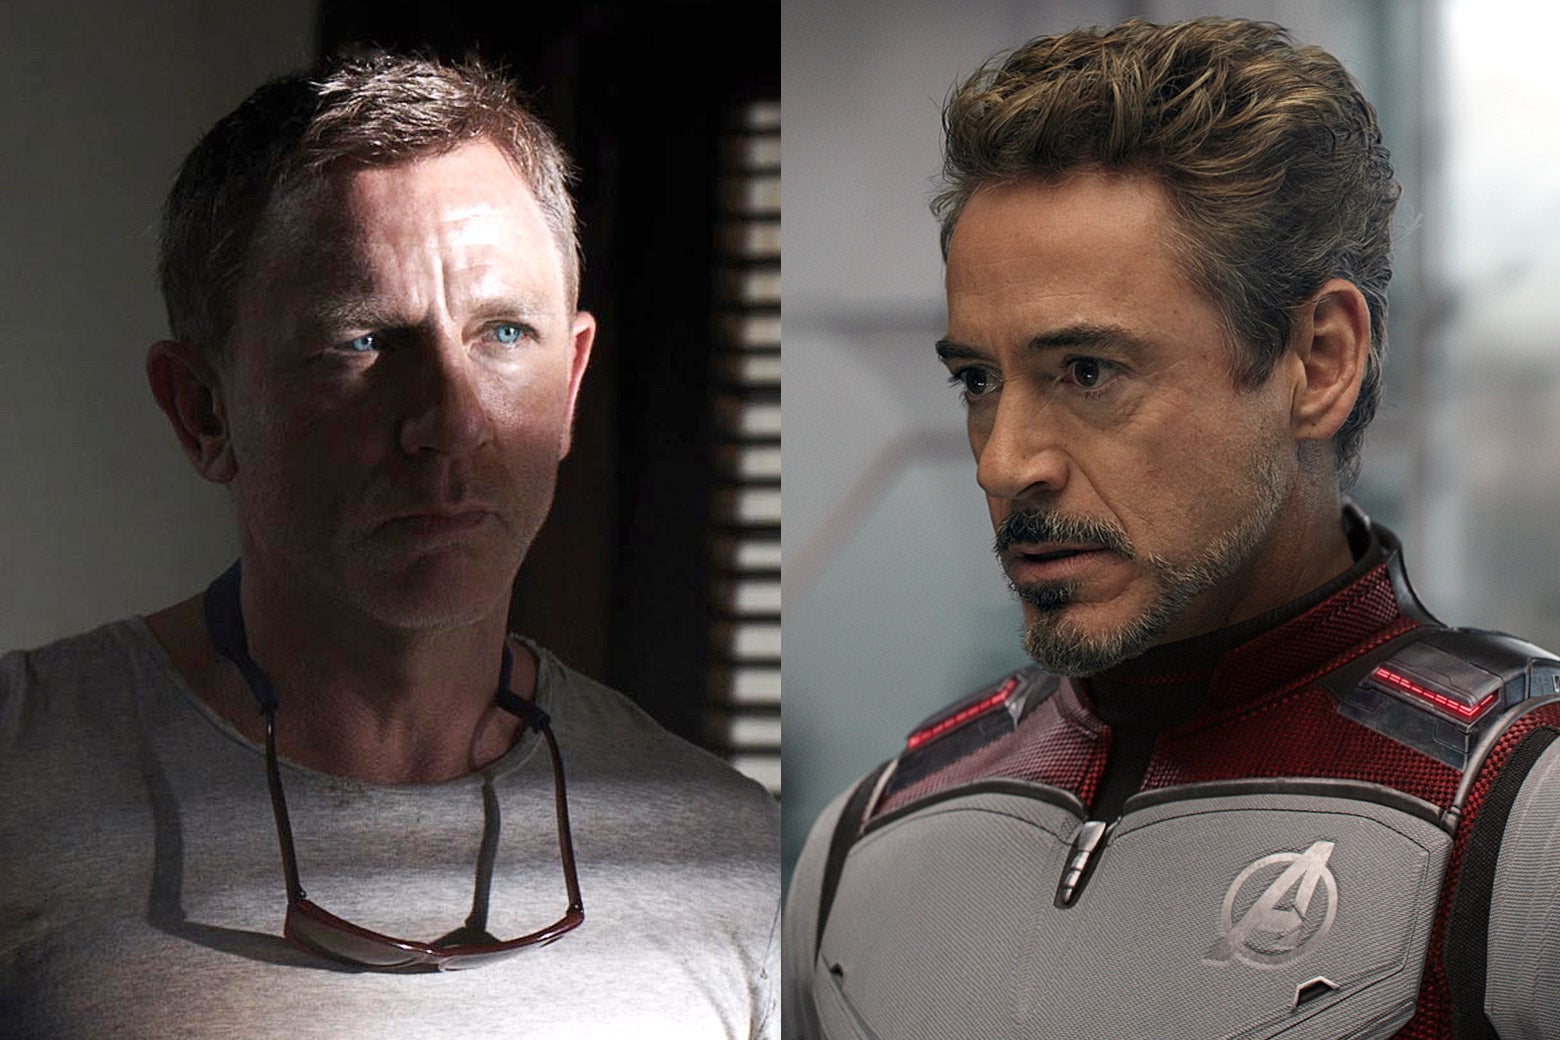 On the left, Daniel Craig as James Bond, looking a little grizzled. On the right, Robert Downey Jr. as Tony Stark, looking a little grizzled.